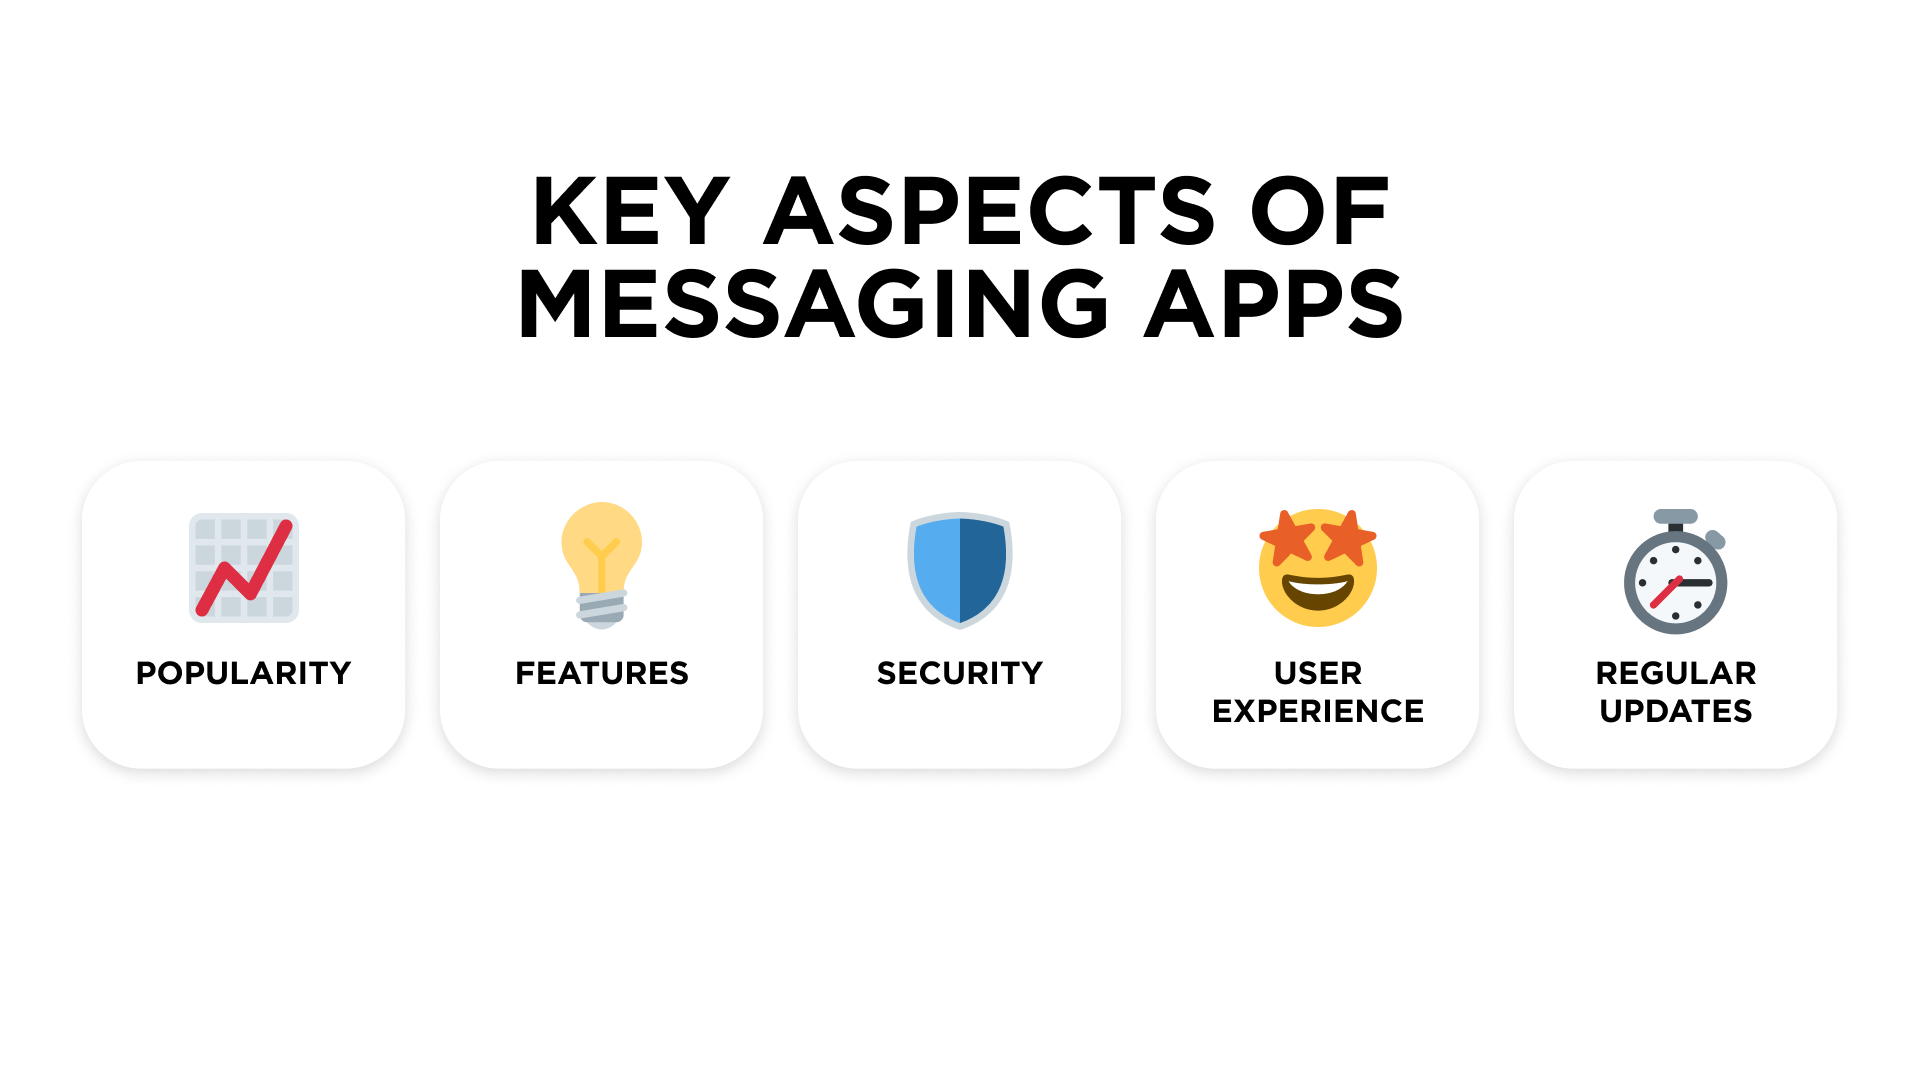 Key aspects of messaging apps